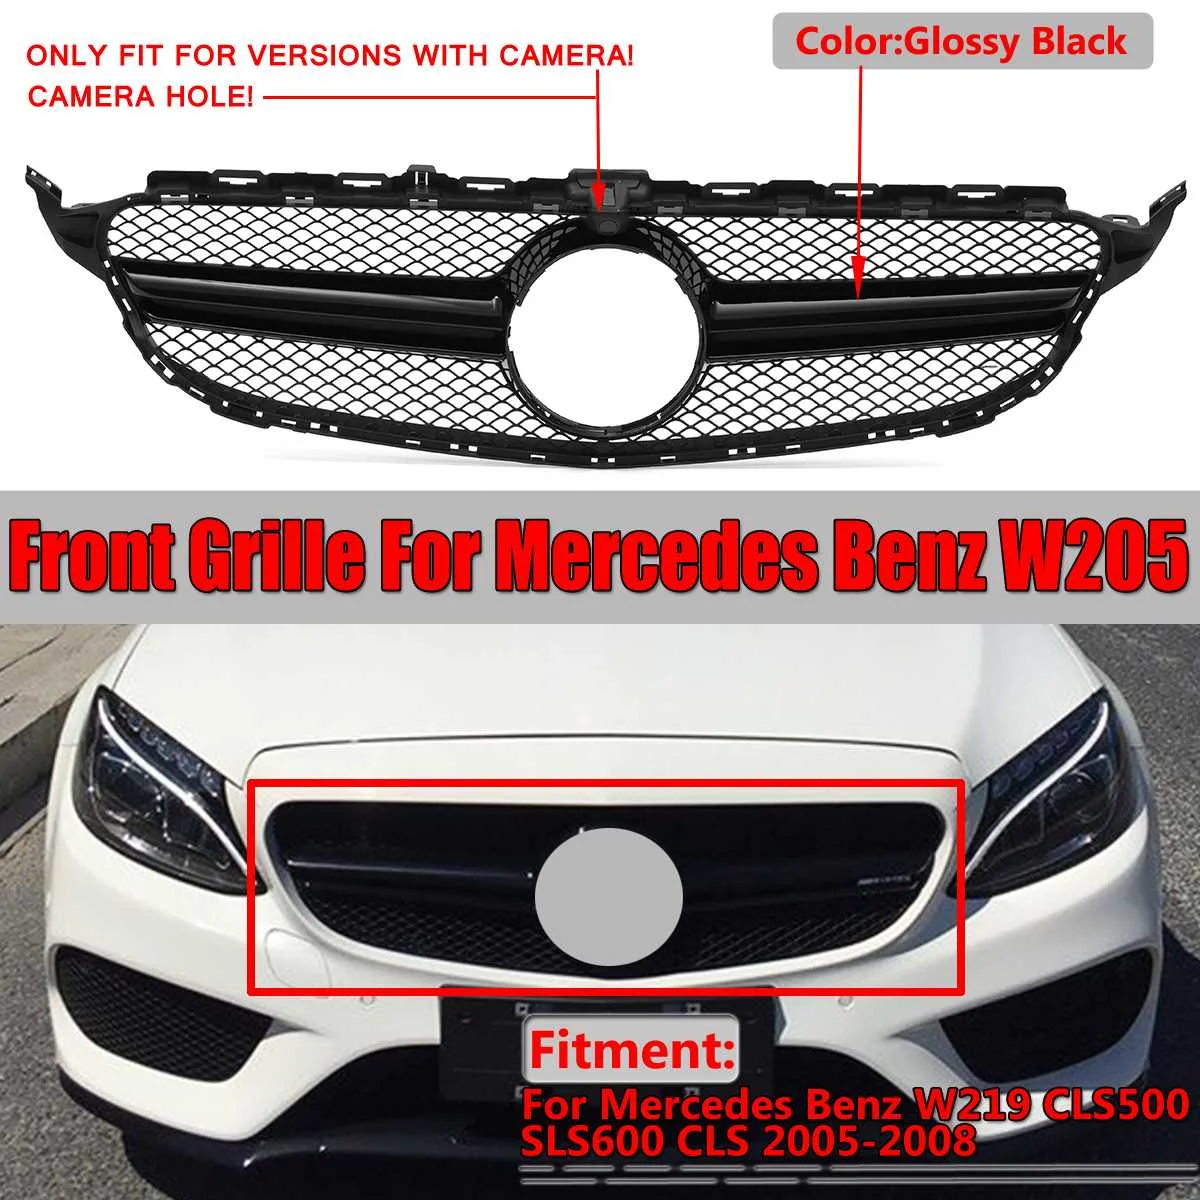 

Front Bumper Grille For Mercedes For Benz w205 C200 C250 C300 C350 Glossy Black 2015-2018 Upper Grille Grill with Camera